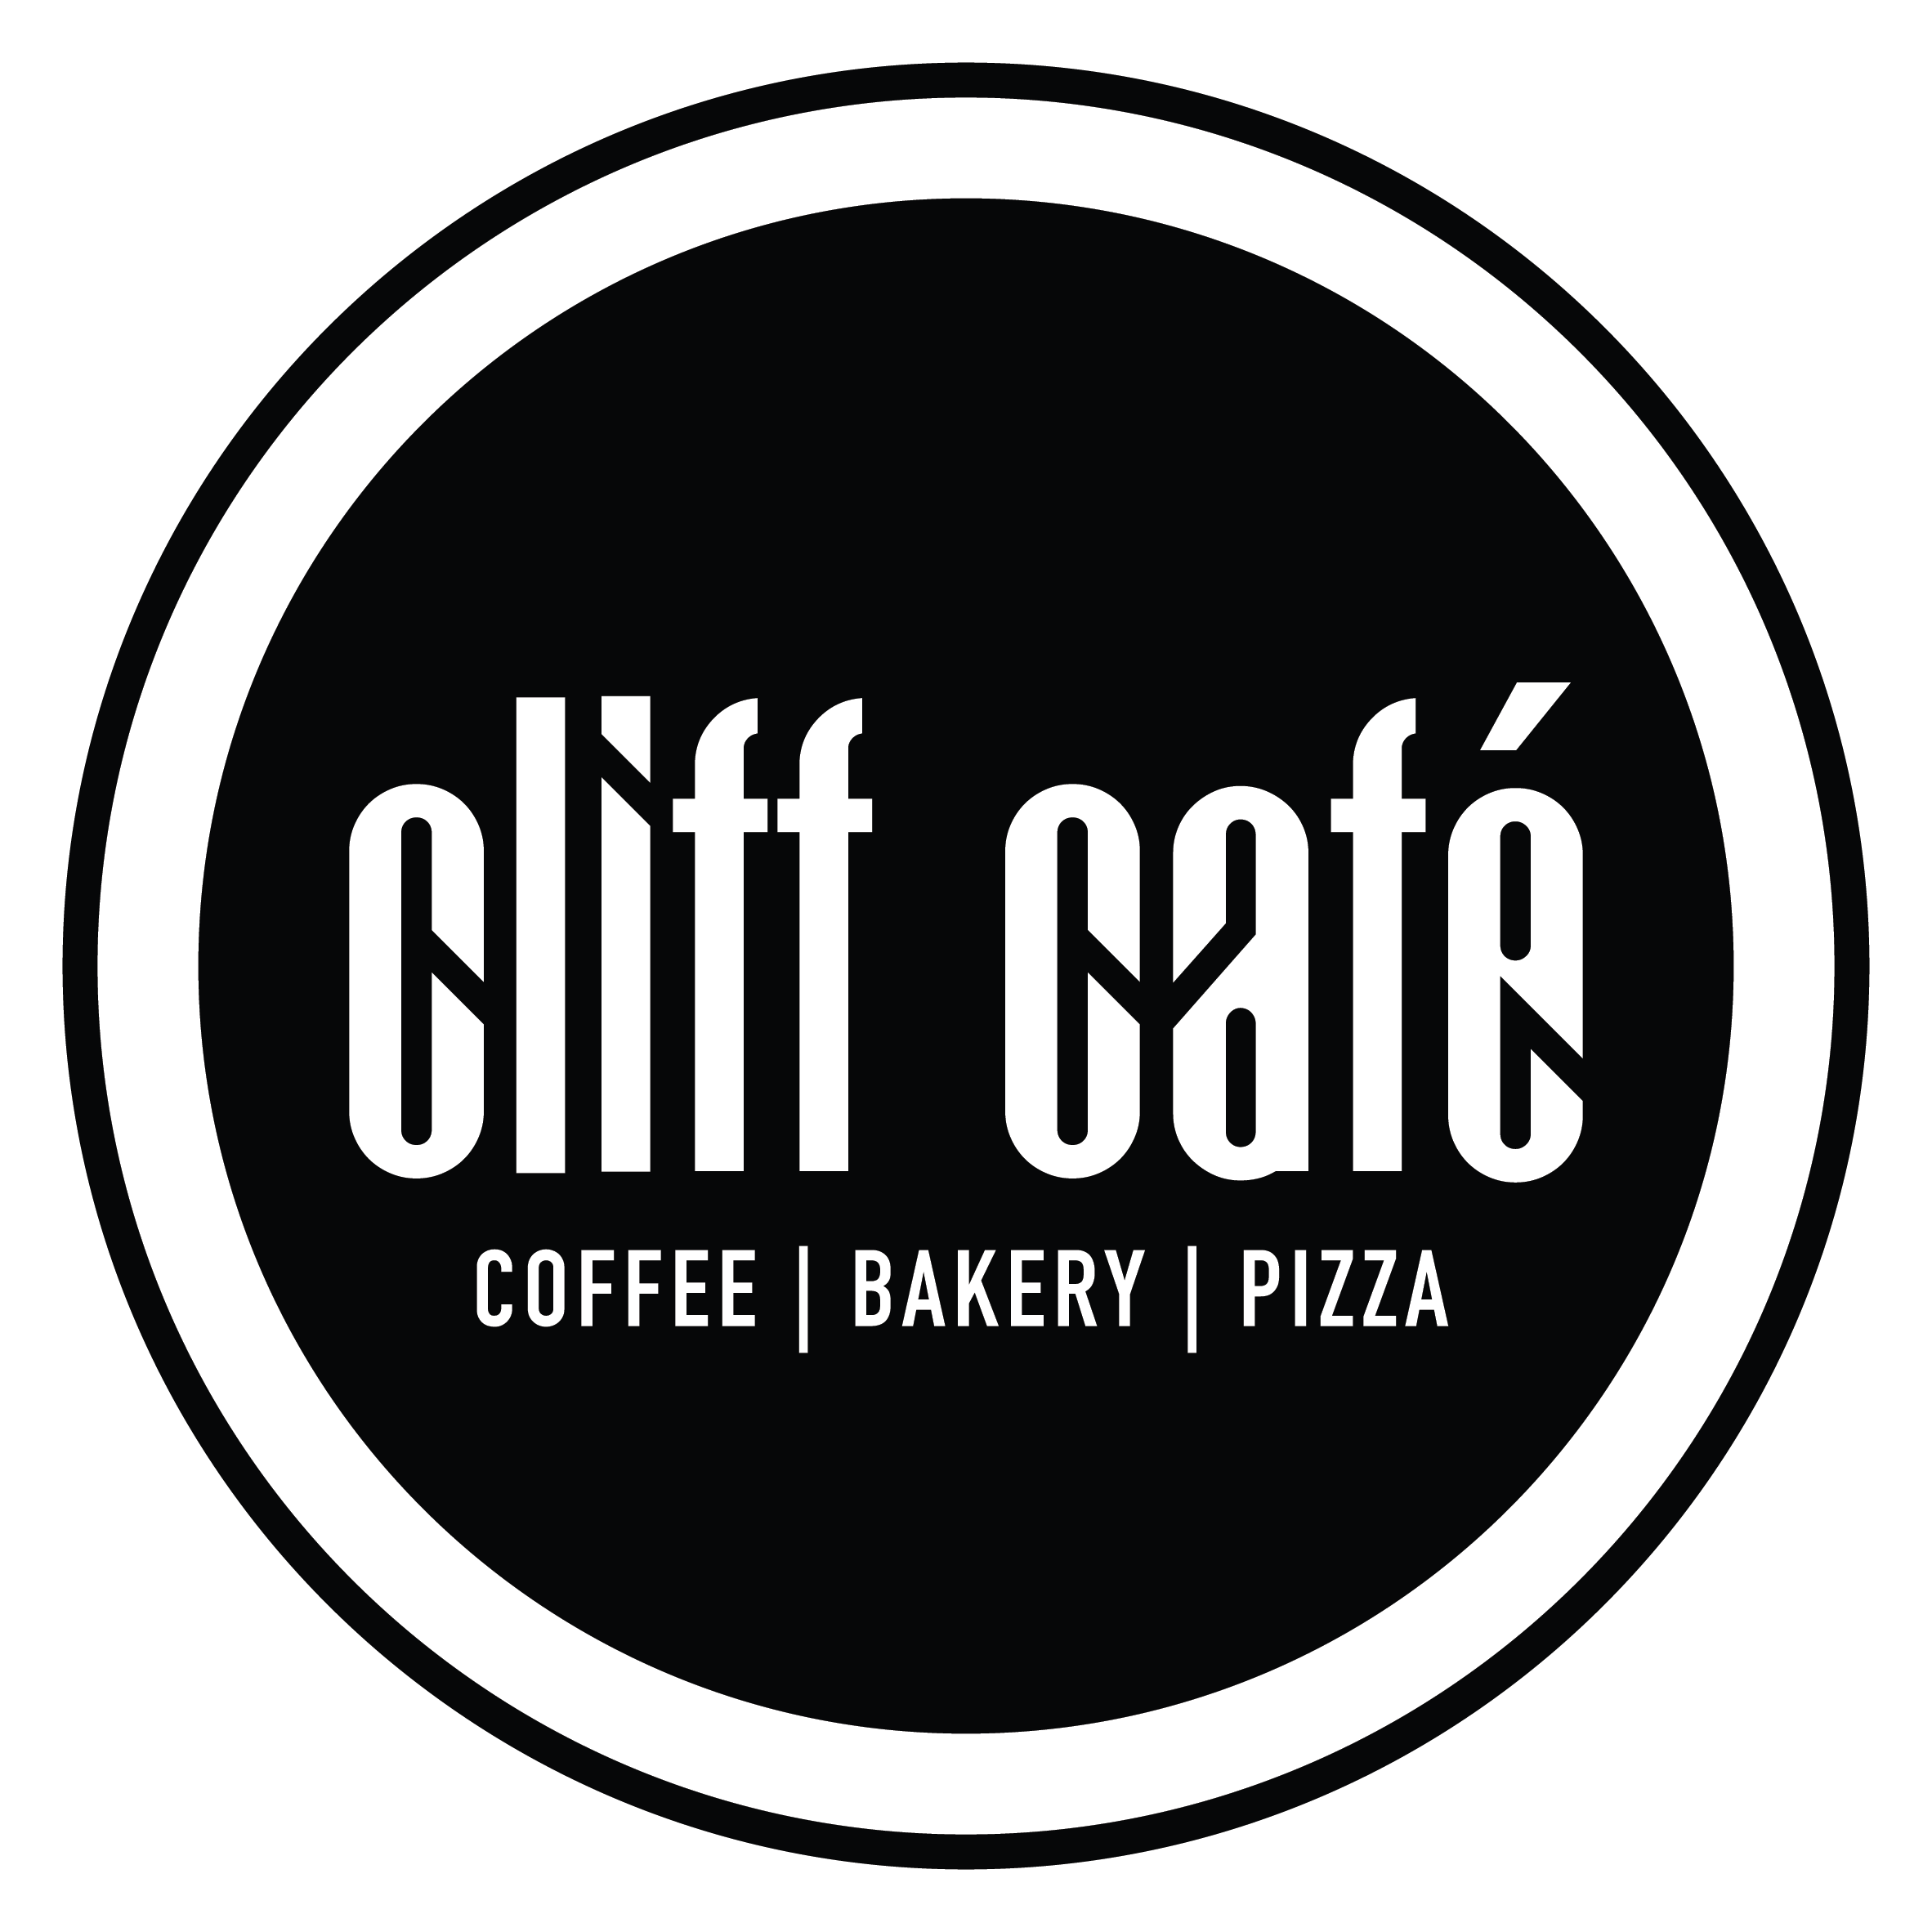 Cliff Cafe